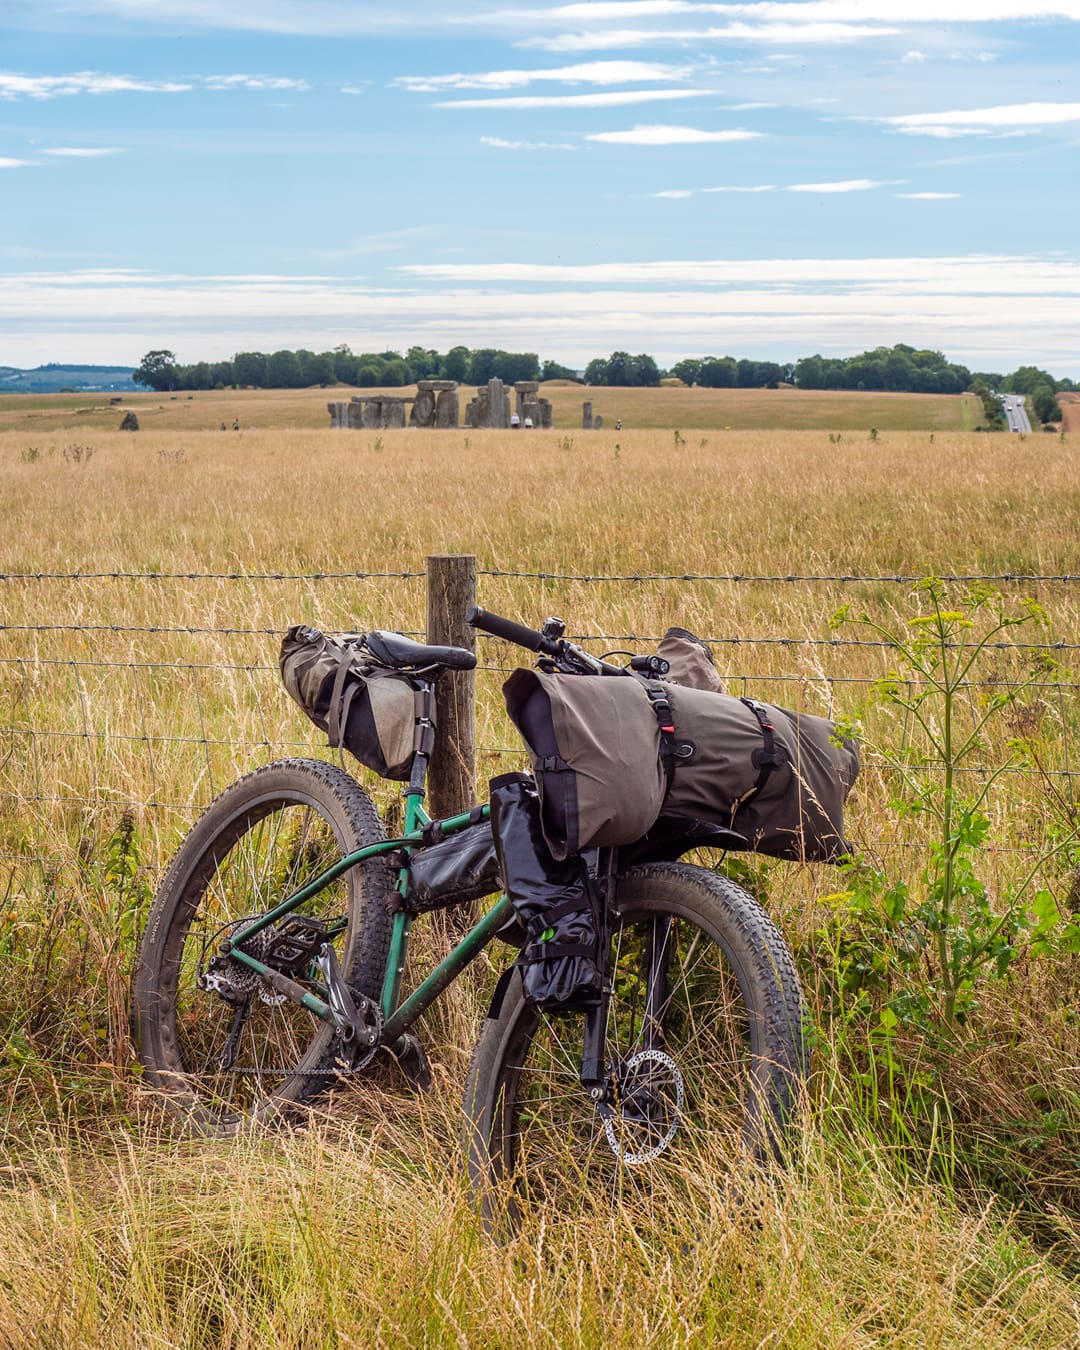 A complete guide to bikepacking in the UK | A hardtail mountain bike rigged up for a bikepacking trip along King Alfred's Way. Photo by Robert Spanring